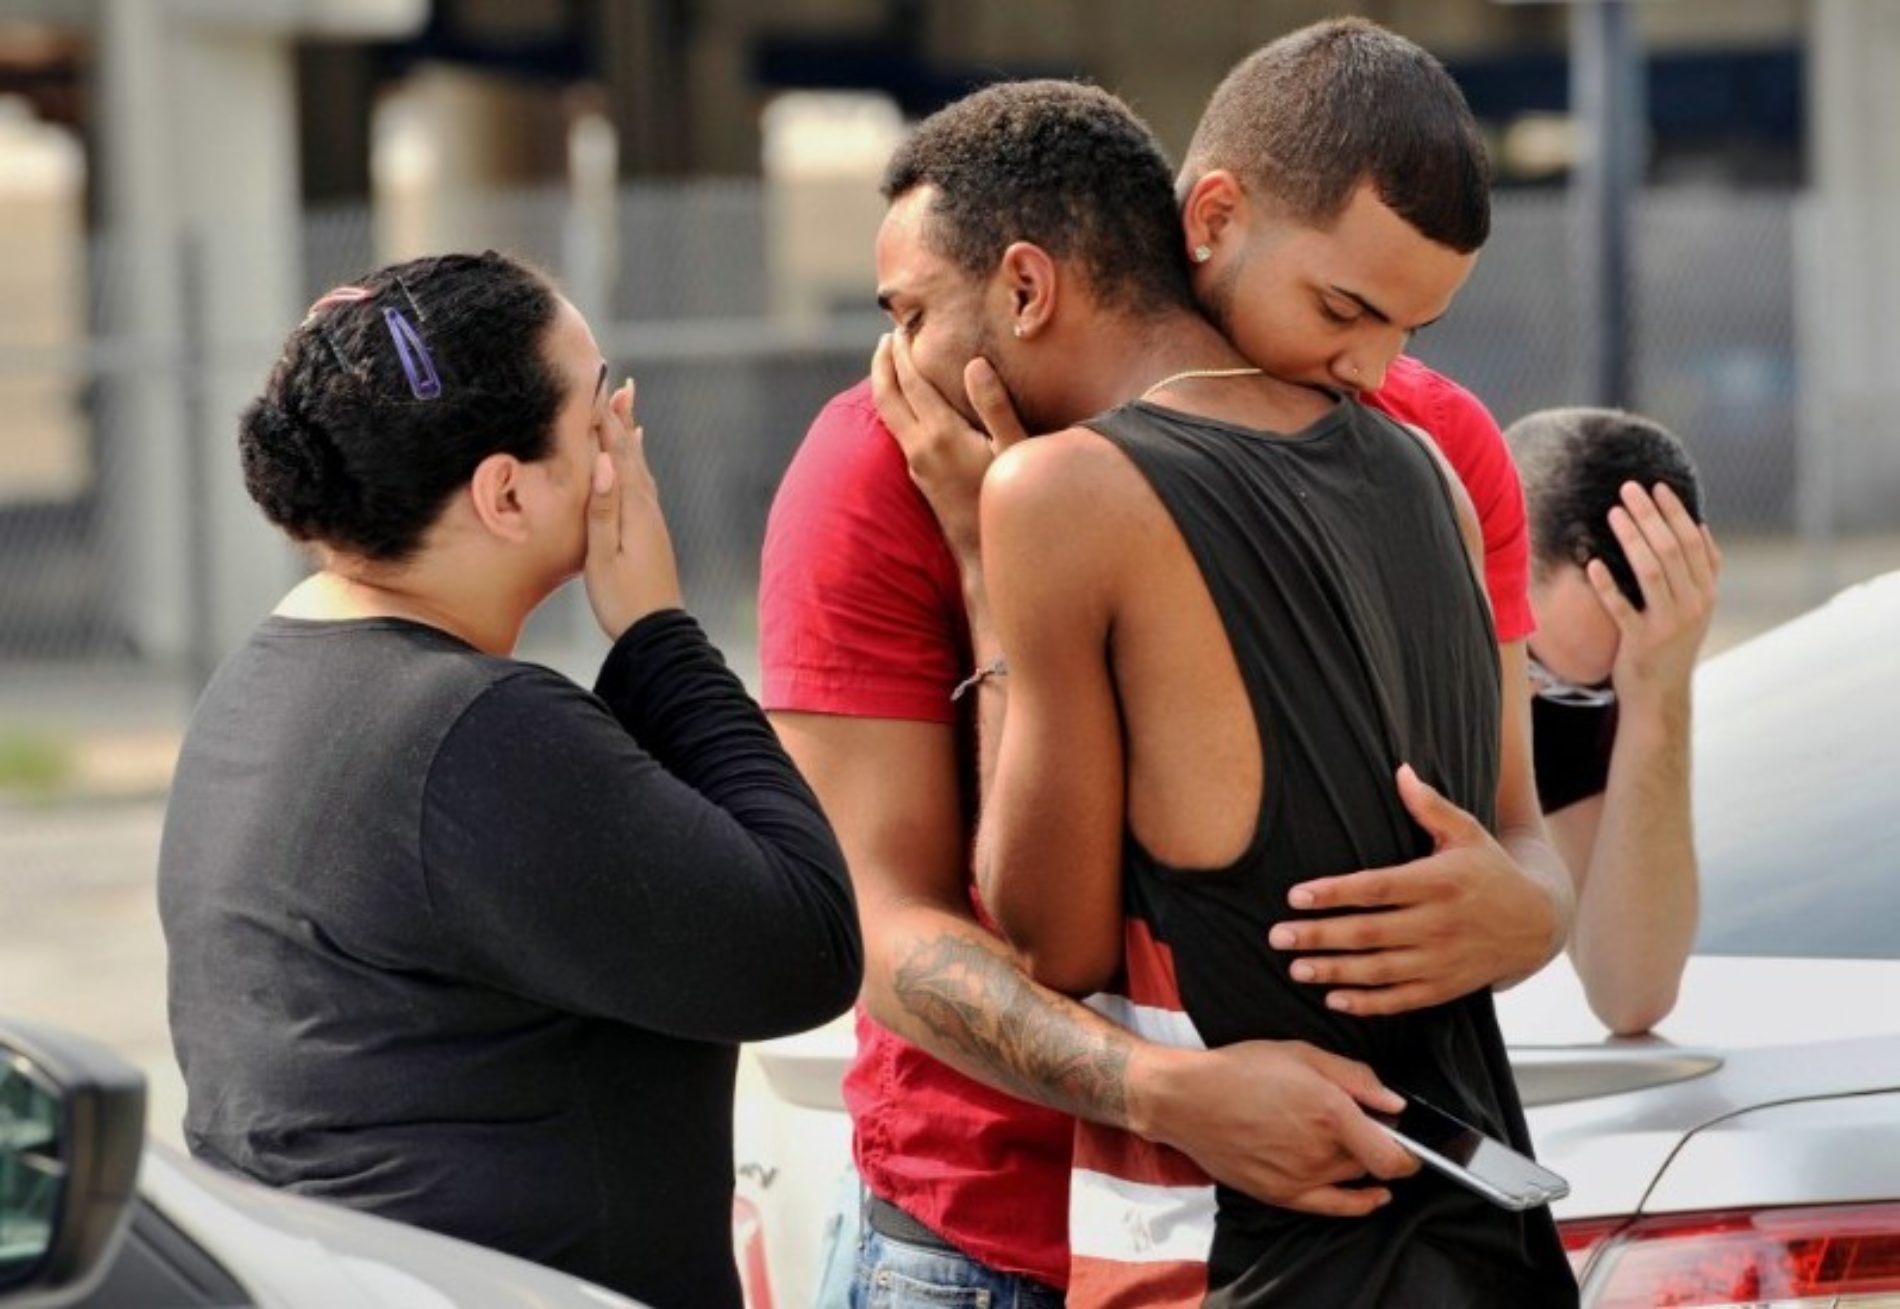 Orlando Shooting: What We Know and Don’t Know